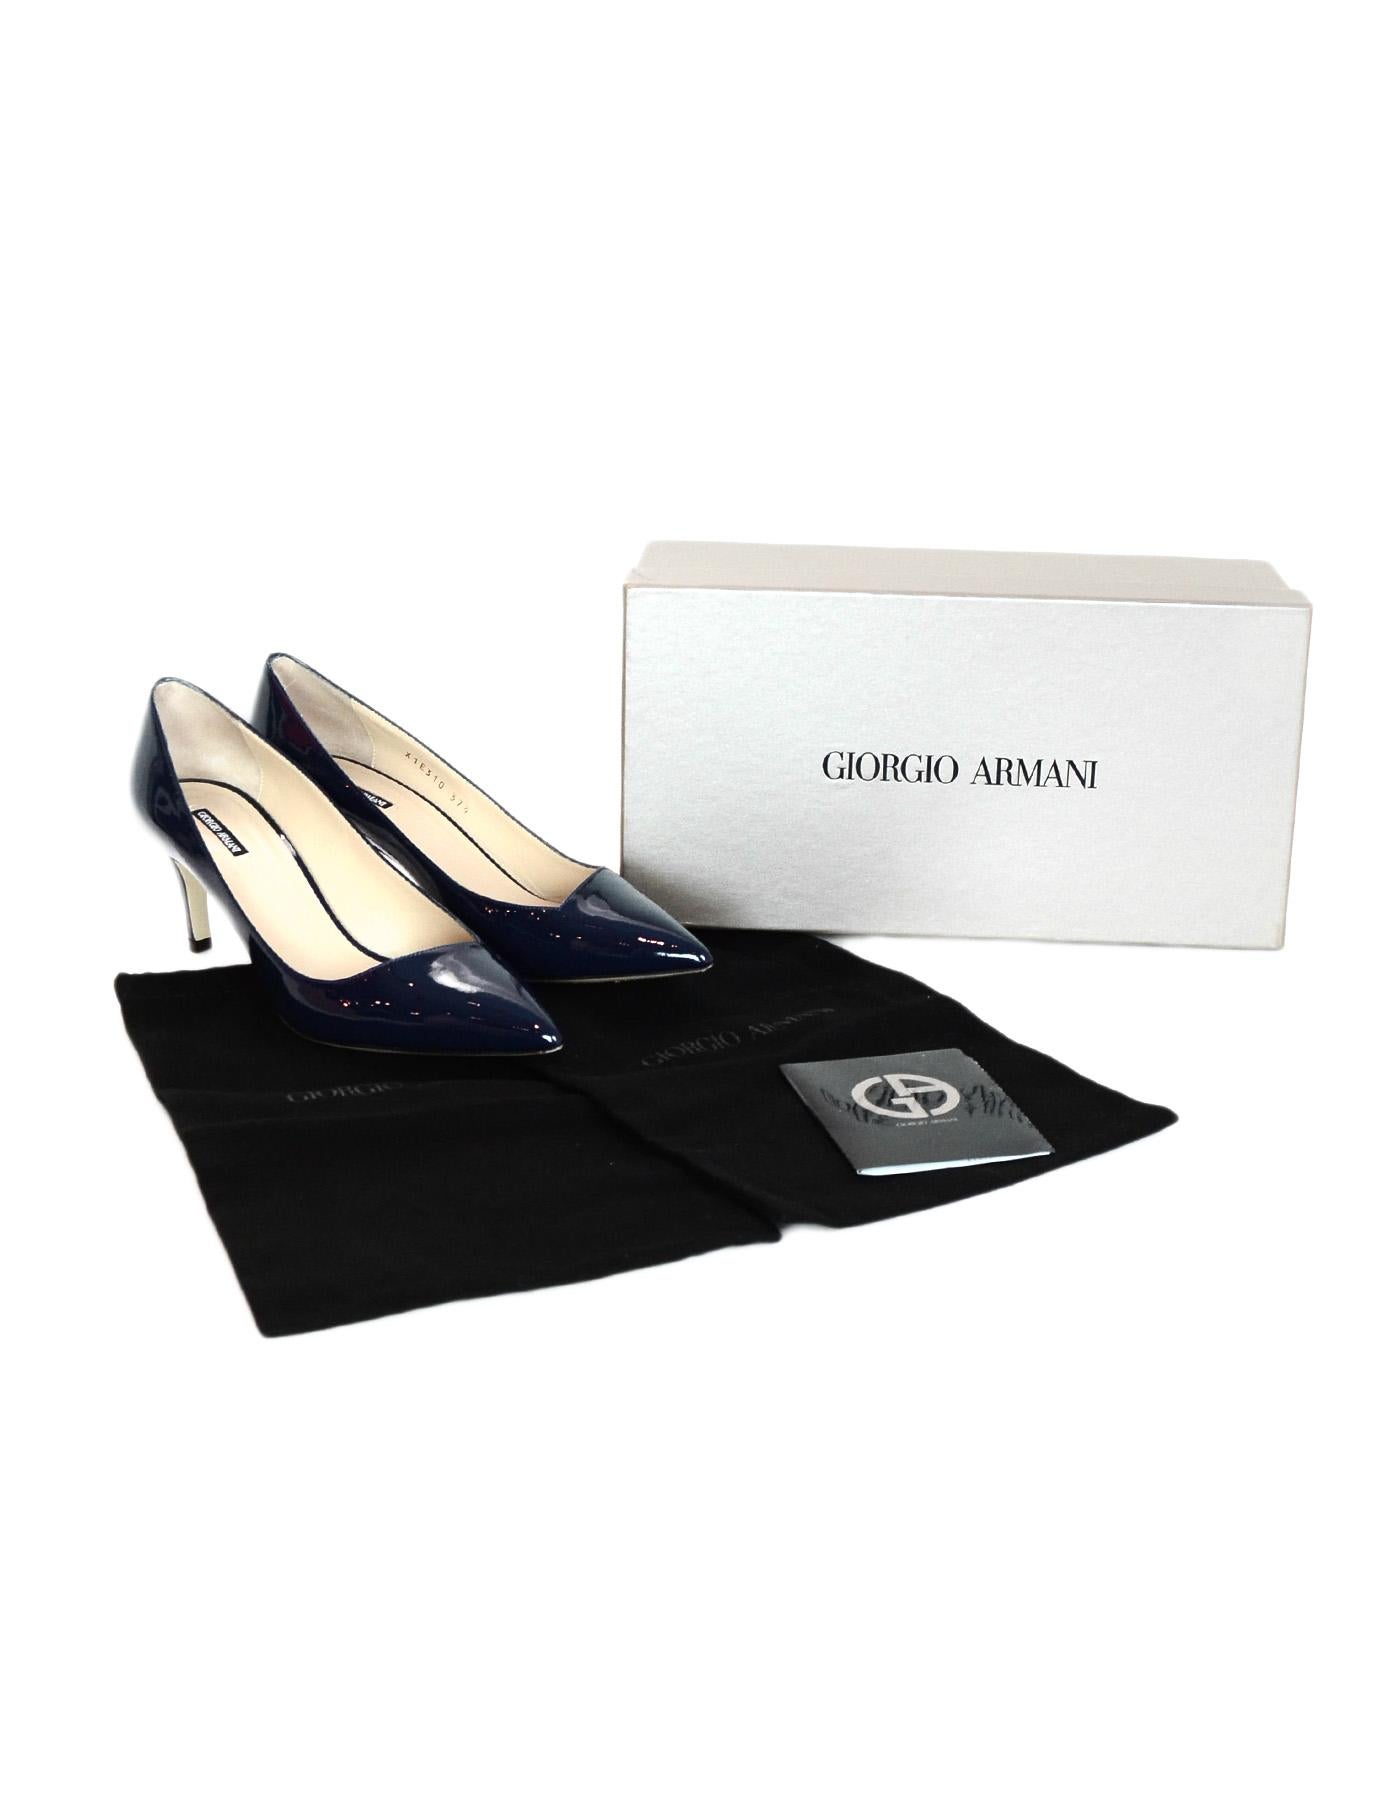 Giorgio Armani Navy Blue Patent Leather Point Toe Pumps Sz 37.5

Made In: Italy
Color: Navy blue
Materials: Patent leather 
Closure/Opening: Slide on
Overall Condition: Excellent pre-owned condition 
Estimated Retail: $595 + tax
Includes: Box and